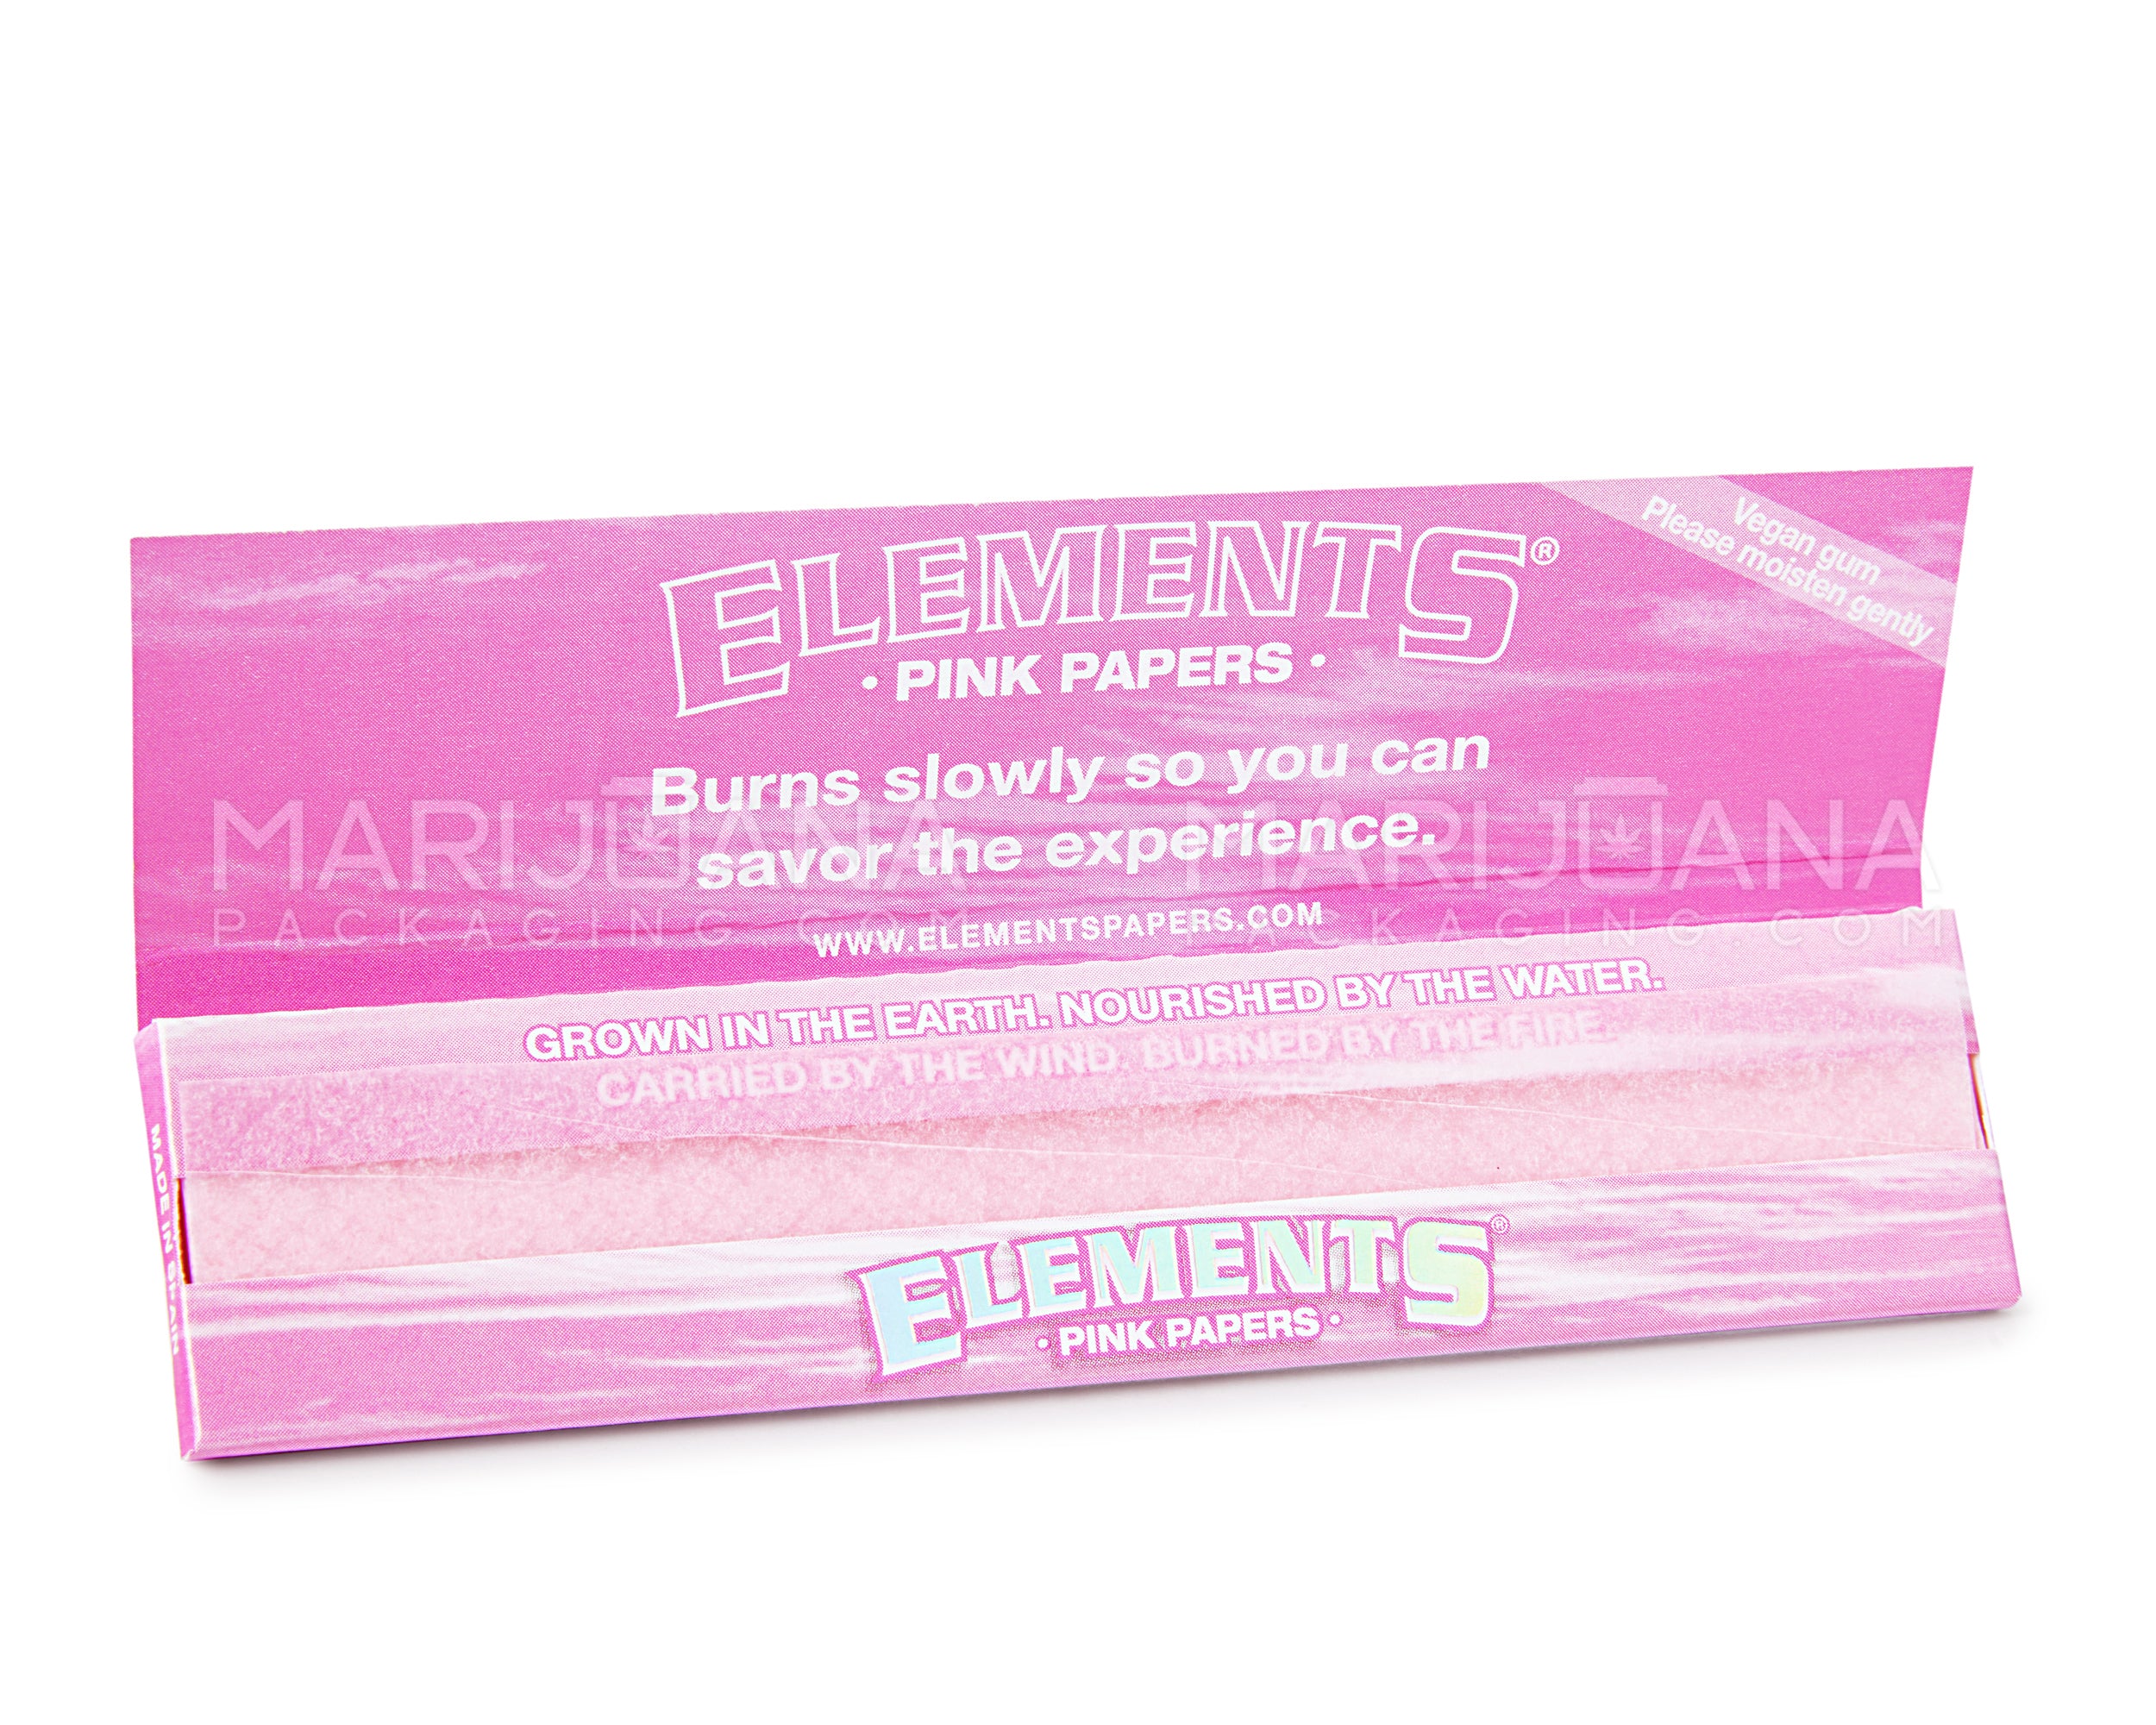 ELEMENTS | 'Retail Display' King Size Slim Ultra Thin Rolling Papers | 116mm - Pink Rice Paper - 50 Count - 3